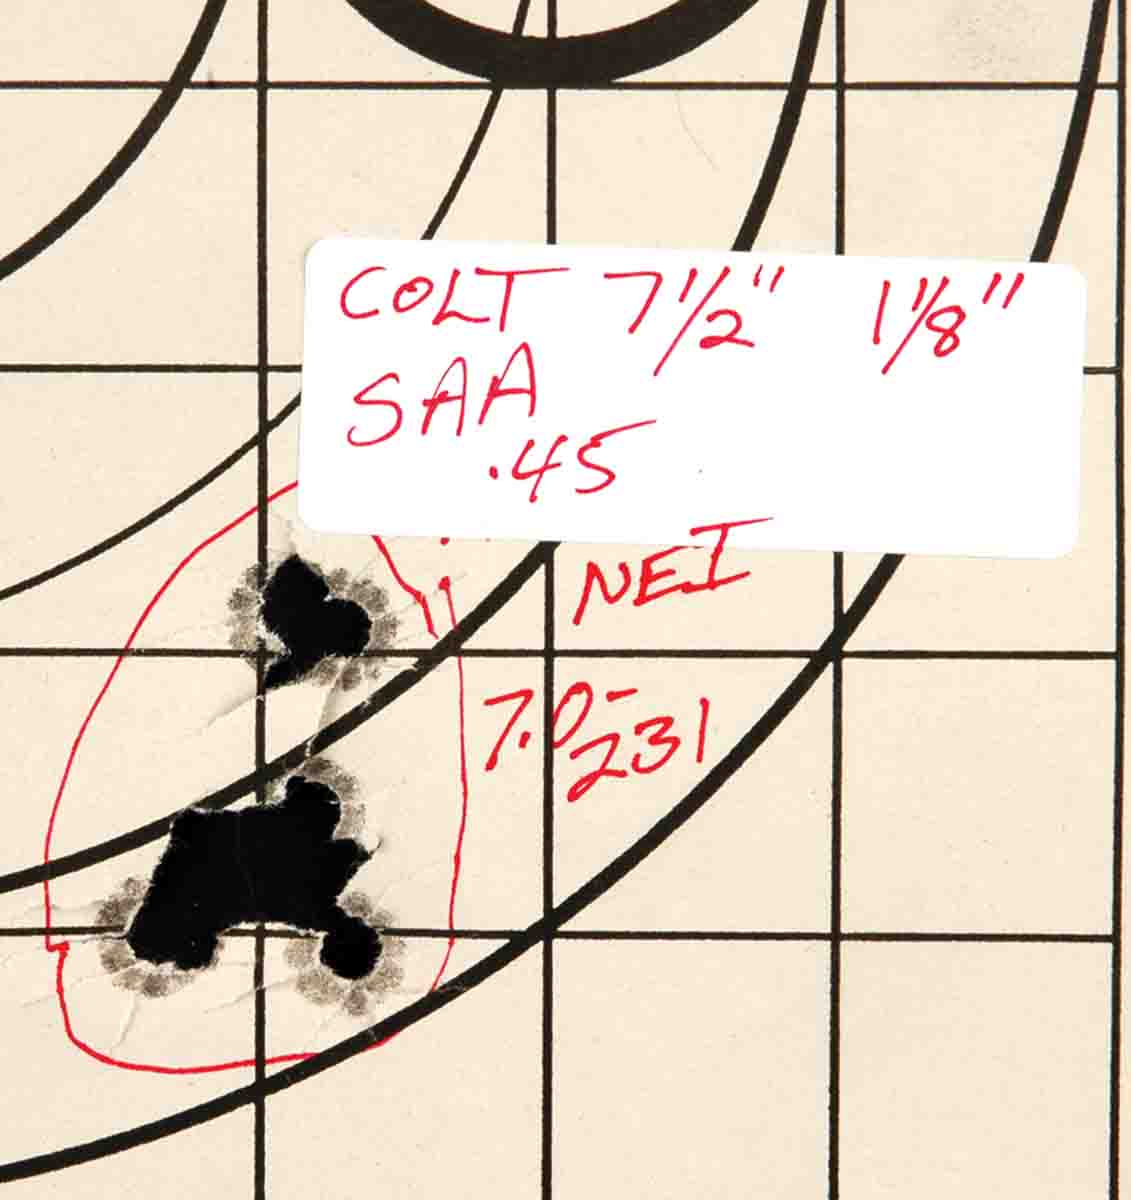 Groups like this from a .45 Colt SAA come easily without a tremendous amount of fuss and bother in the casting and loading processes.